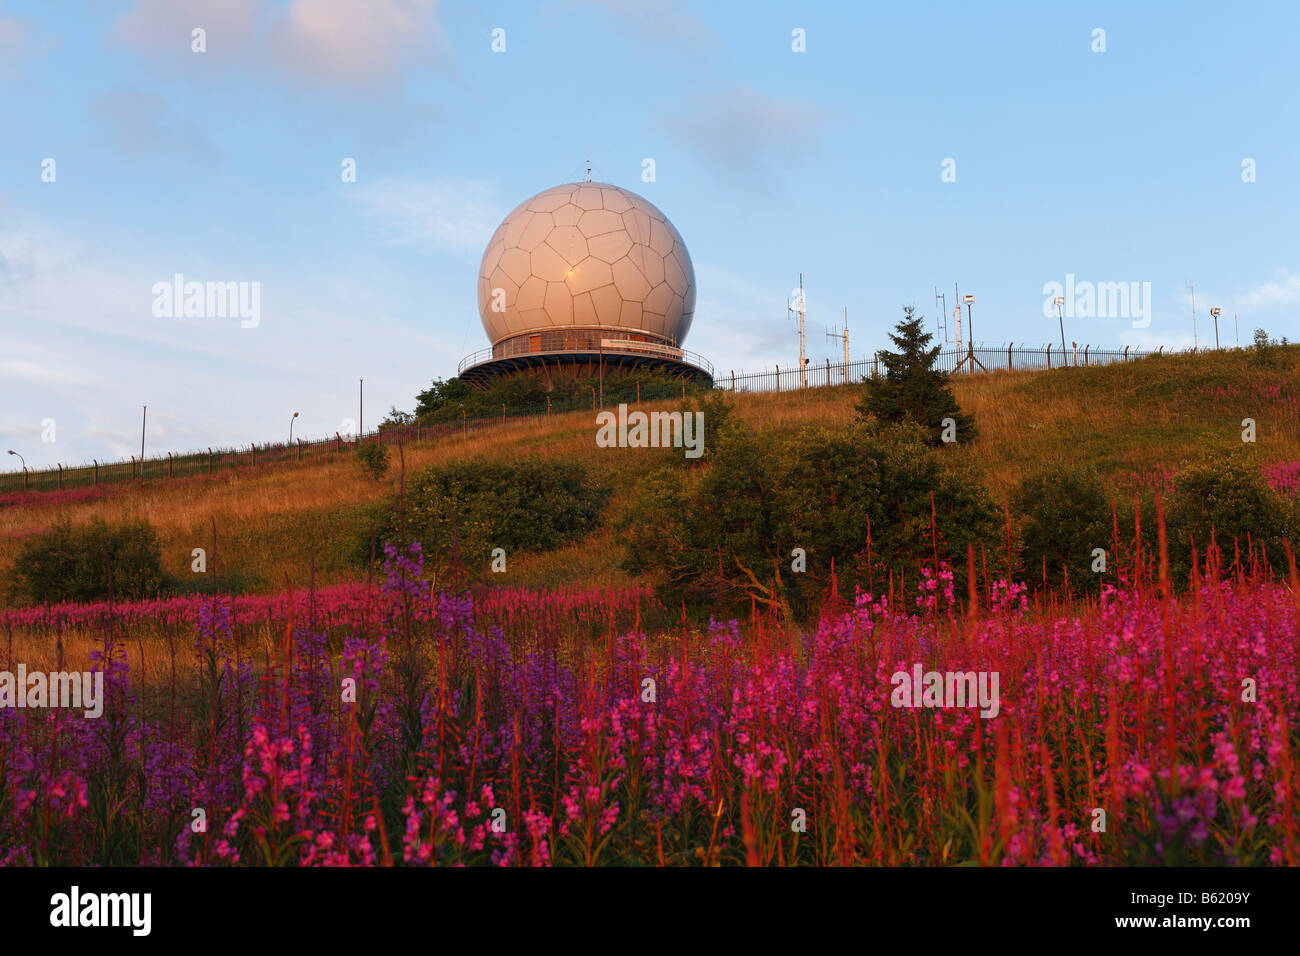 Radar dome and antenna systems on the Wasserkuppe plateau, Rhoen, Hesse, Germany, Europe Stock Photo